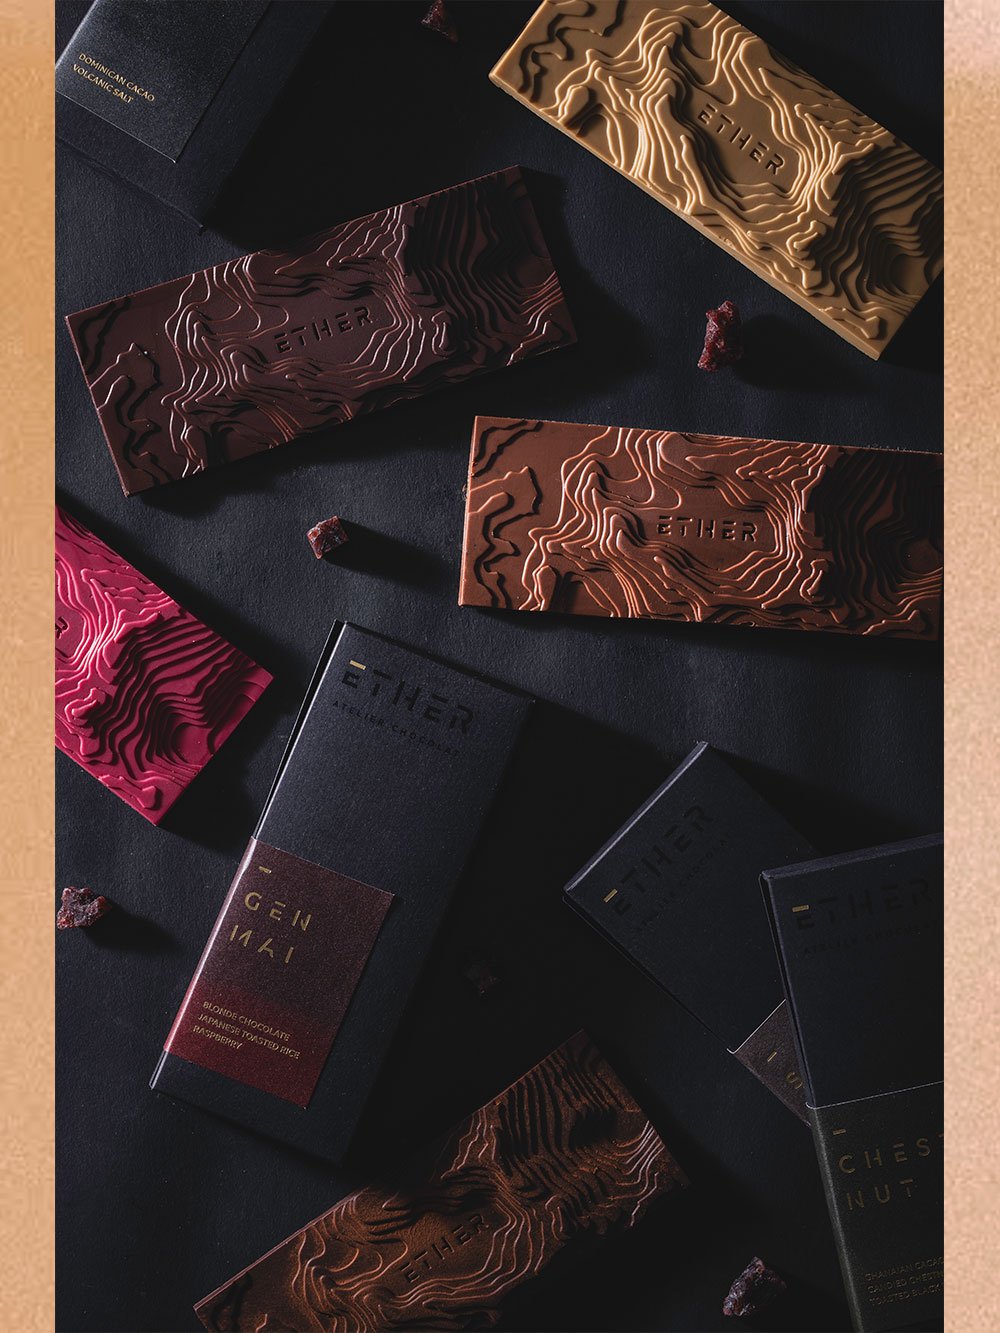 Shop Ether Atelier Chocolat Gourmet Products